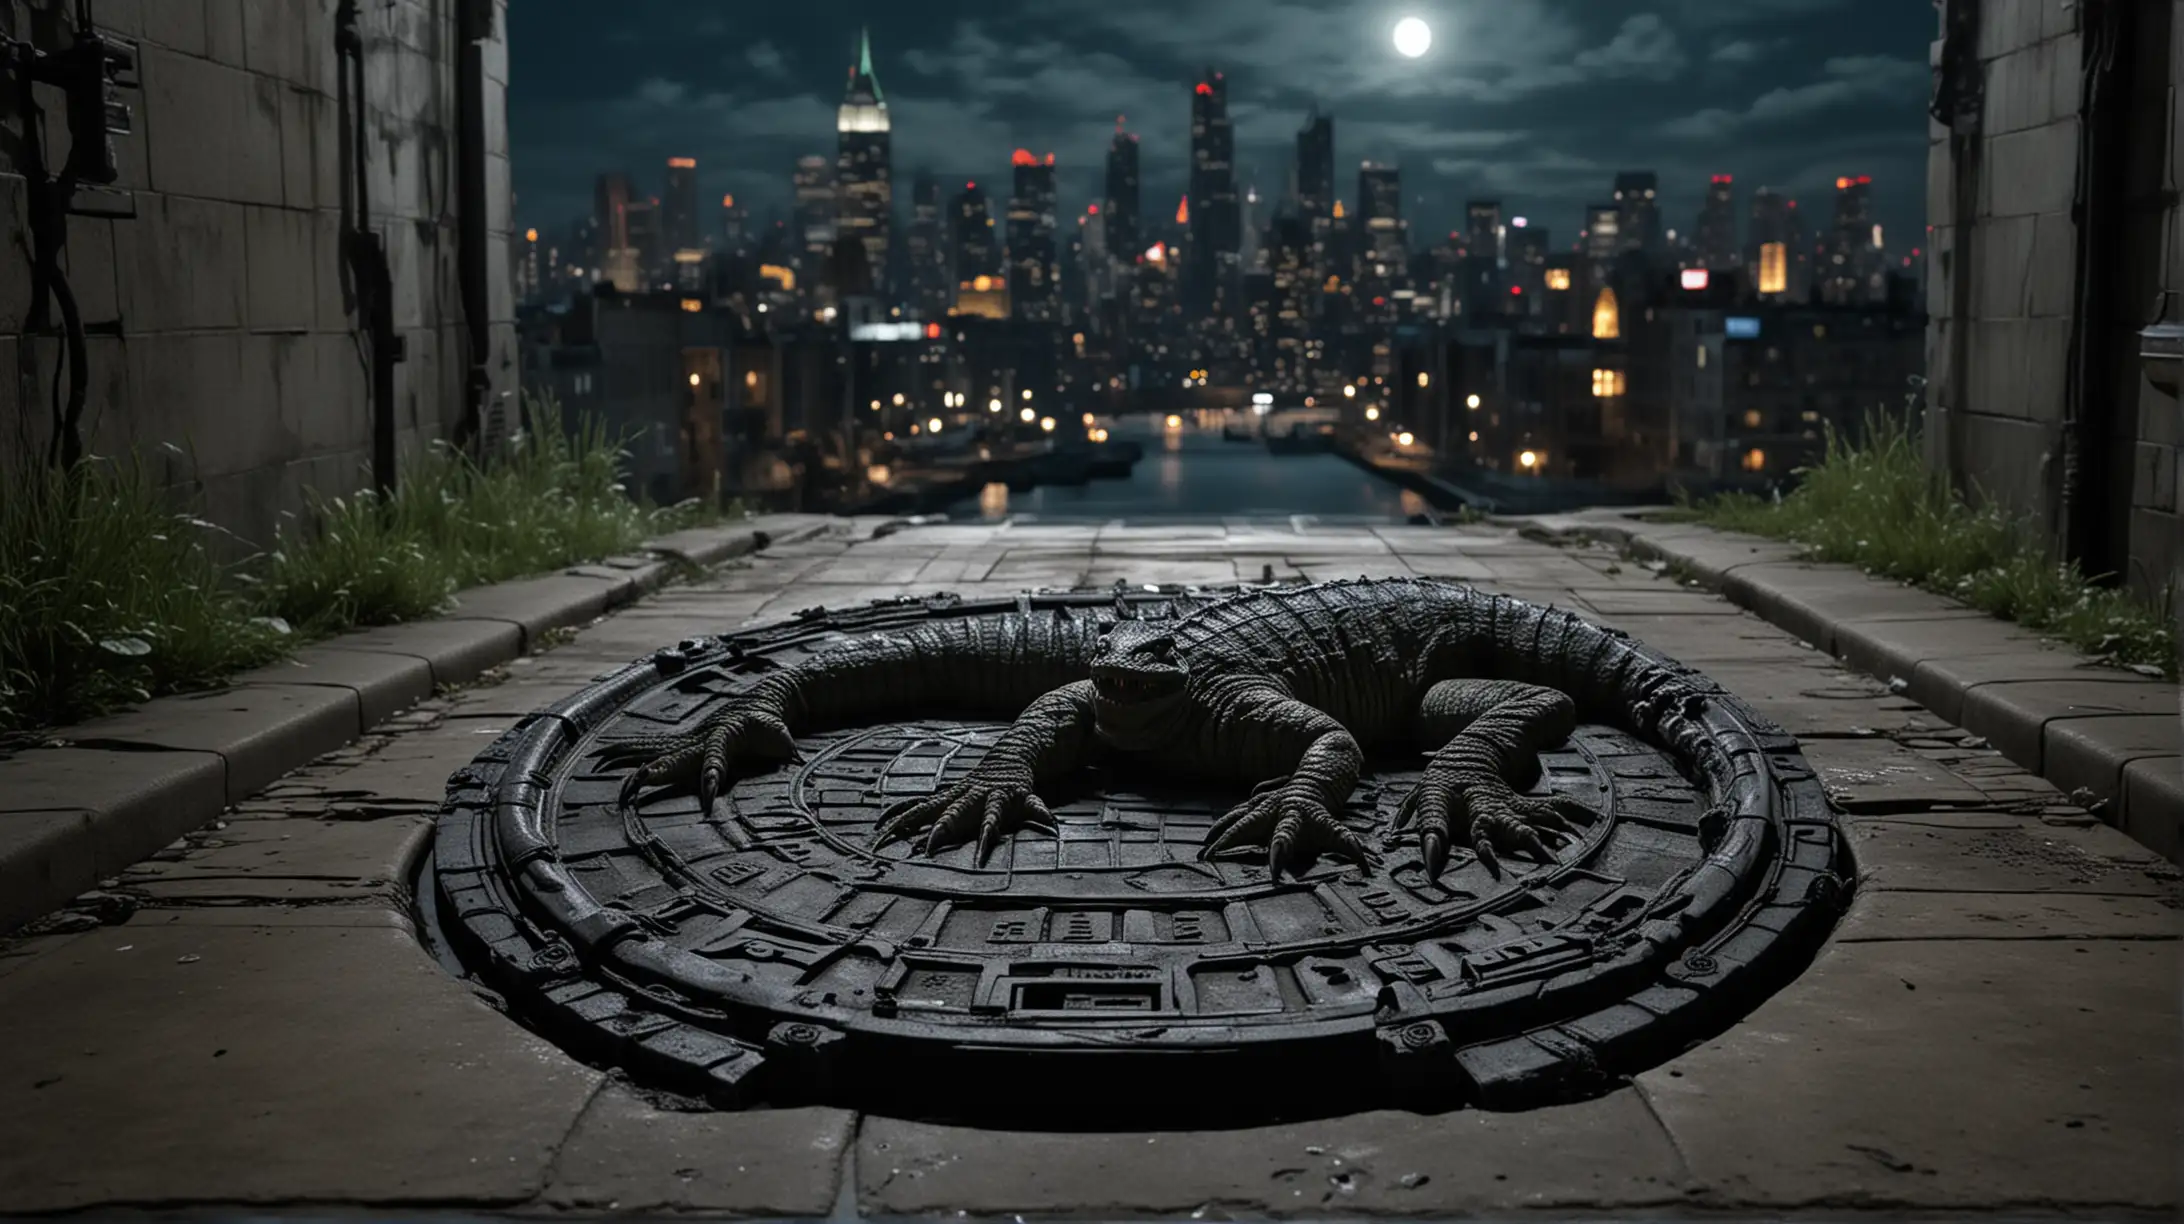 Urban Night Scene Mutant Reptile Hand Emerges from Sewer